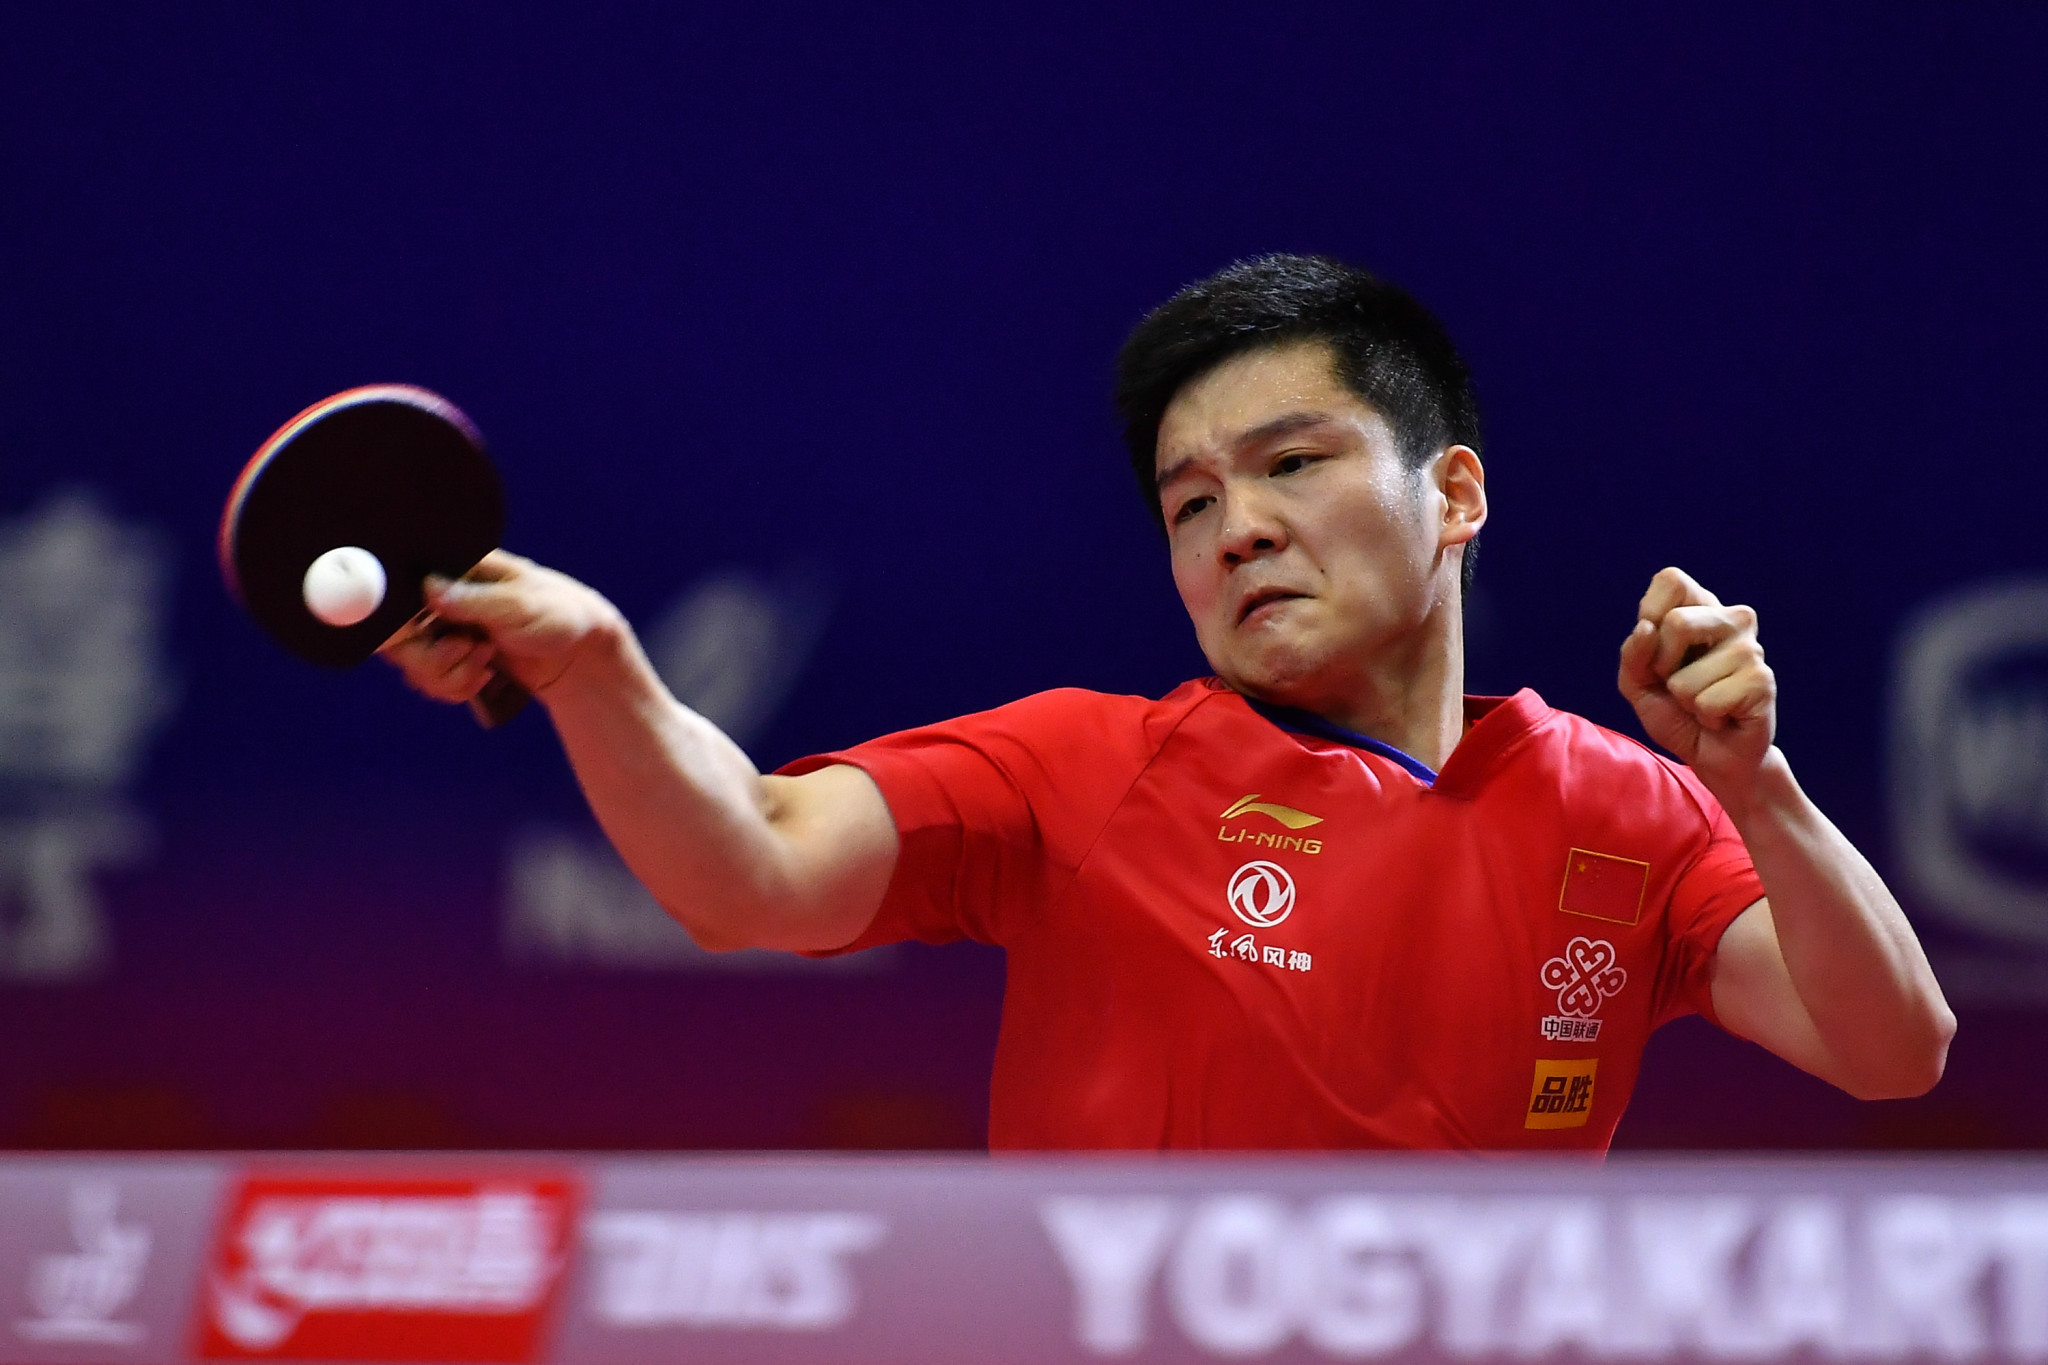 Fan Zhendong helped hosts China to the men's team table tennis title at the World Military Games in Wuhan ©Getty Images